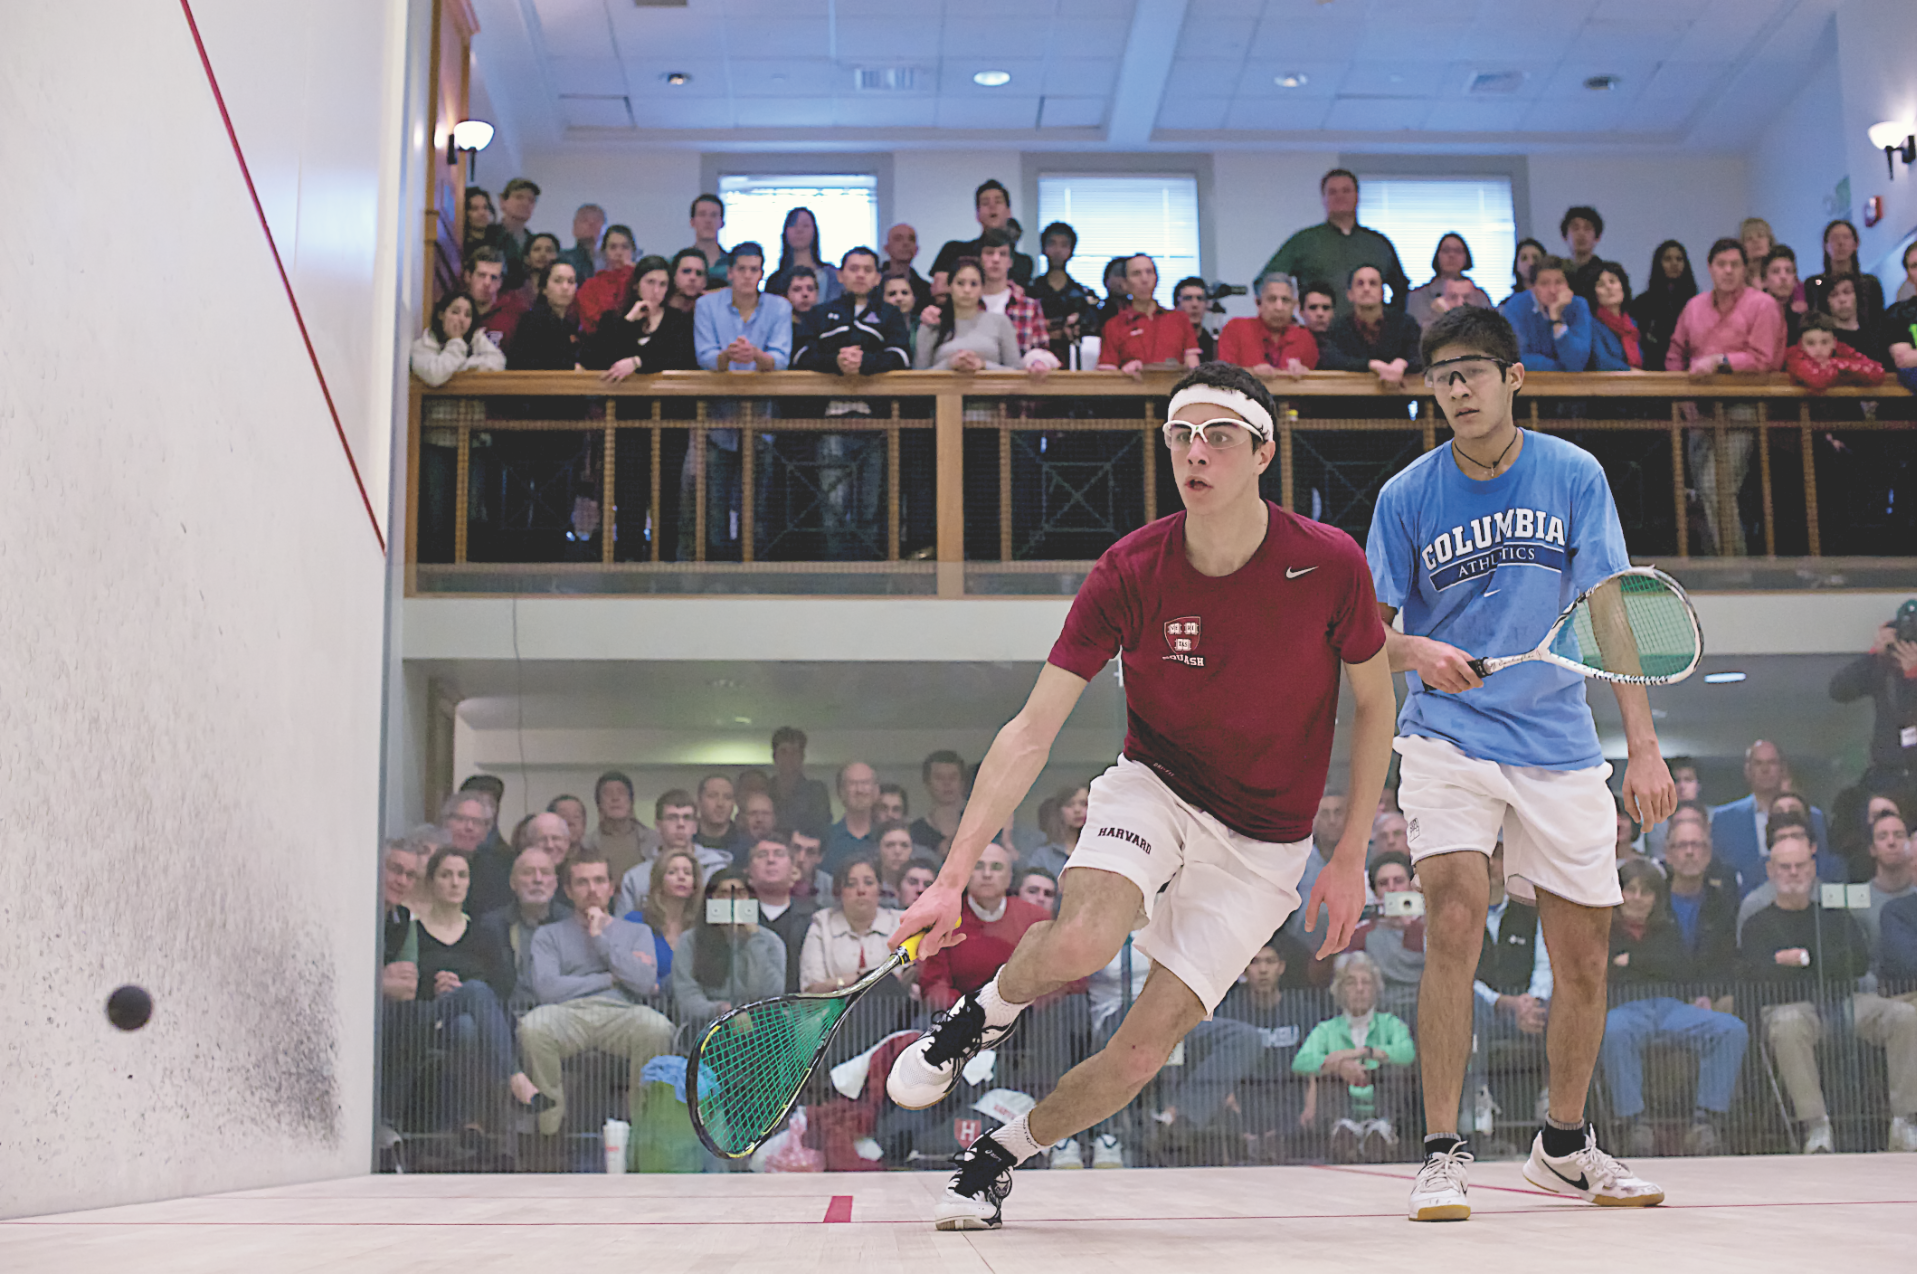 The CSA Individual Championships, held at Amherst, crowned Harvard’s Ali Farag (L), a three-game winner over Columbia’s Ramit Tandon.